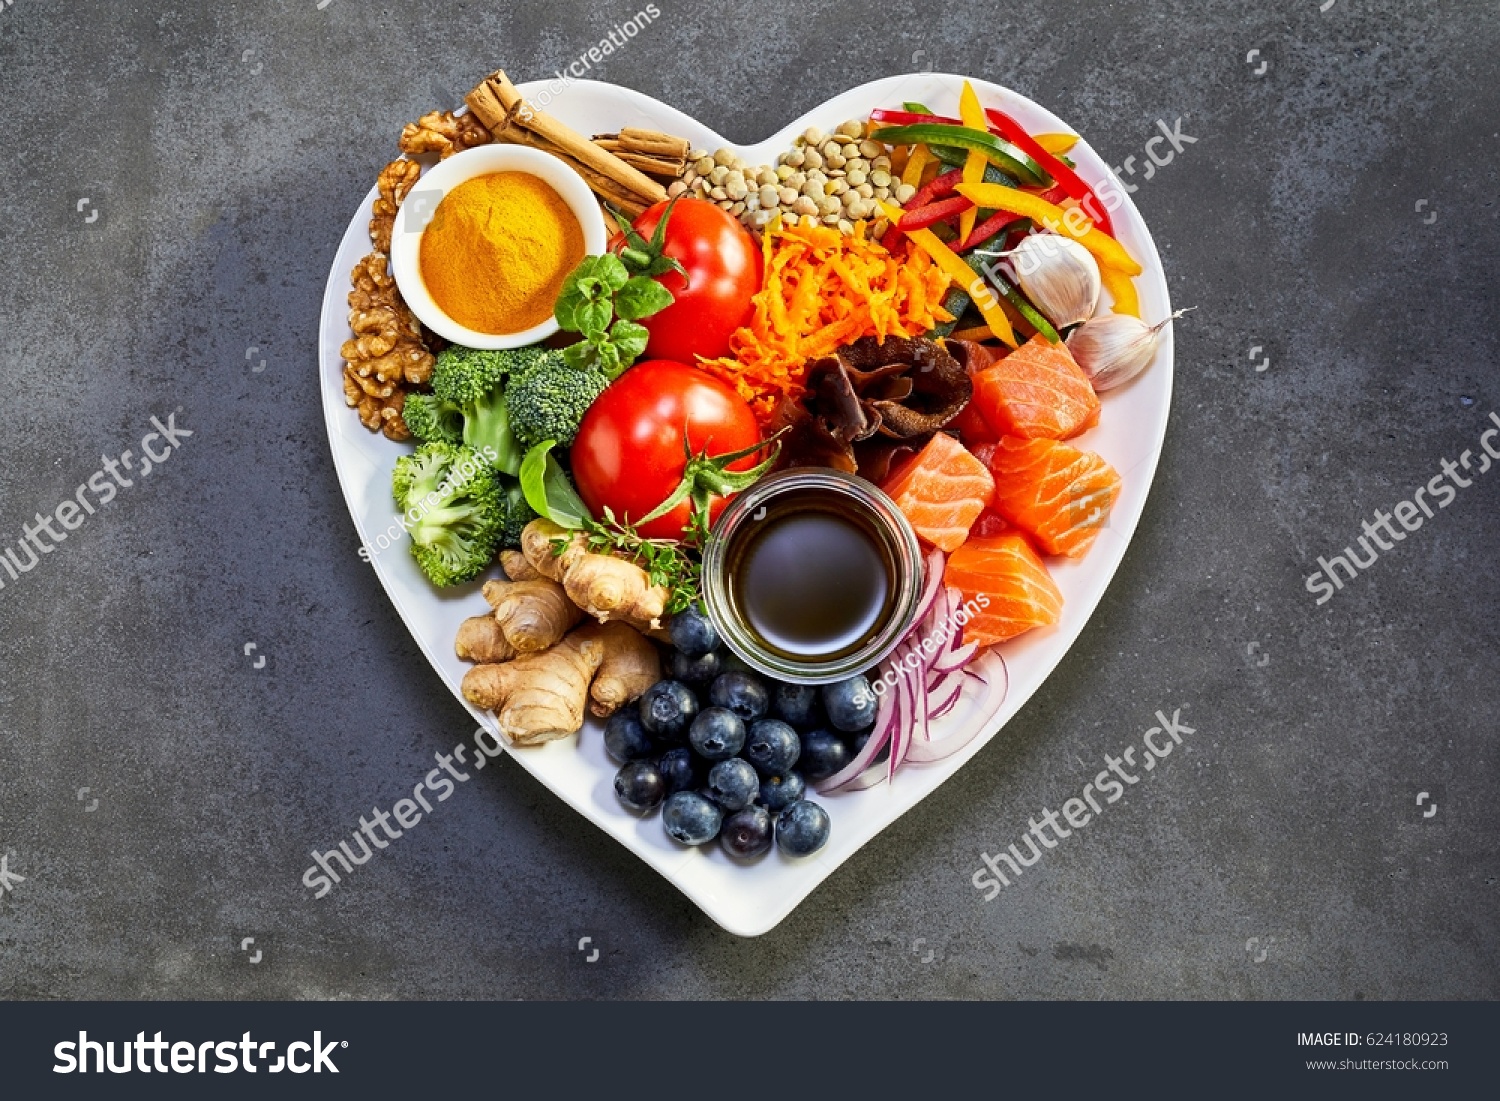 Healthy diet for the cardiovascular system with a heart-shaped plate of acai, lentils, soy sauce, ginger, salmon, carrot, tomato, turmeric, cinnamon, walnuts, garlic, peppers, broccoli, basil, onion #624180923